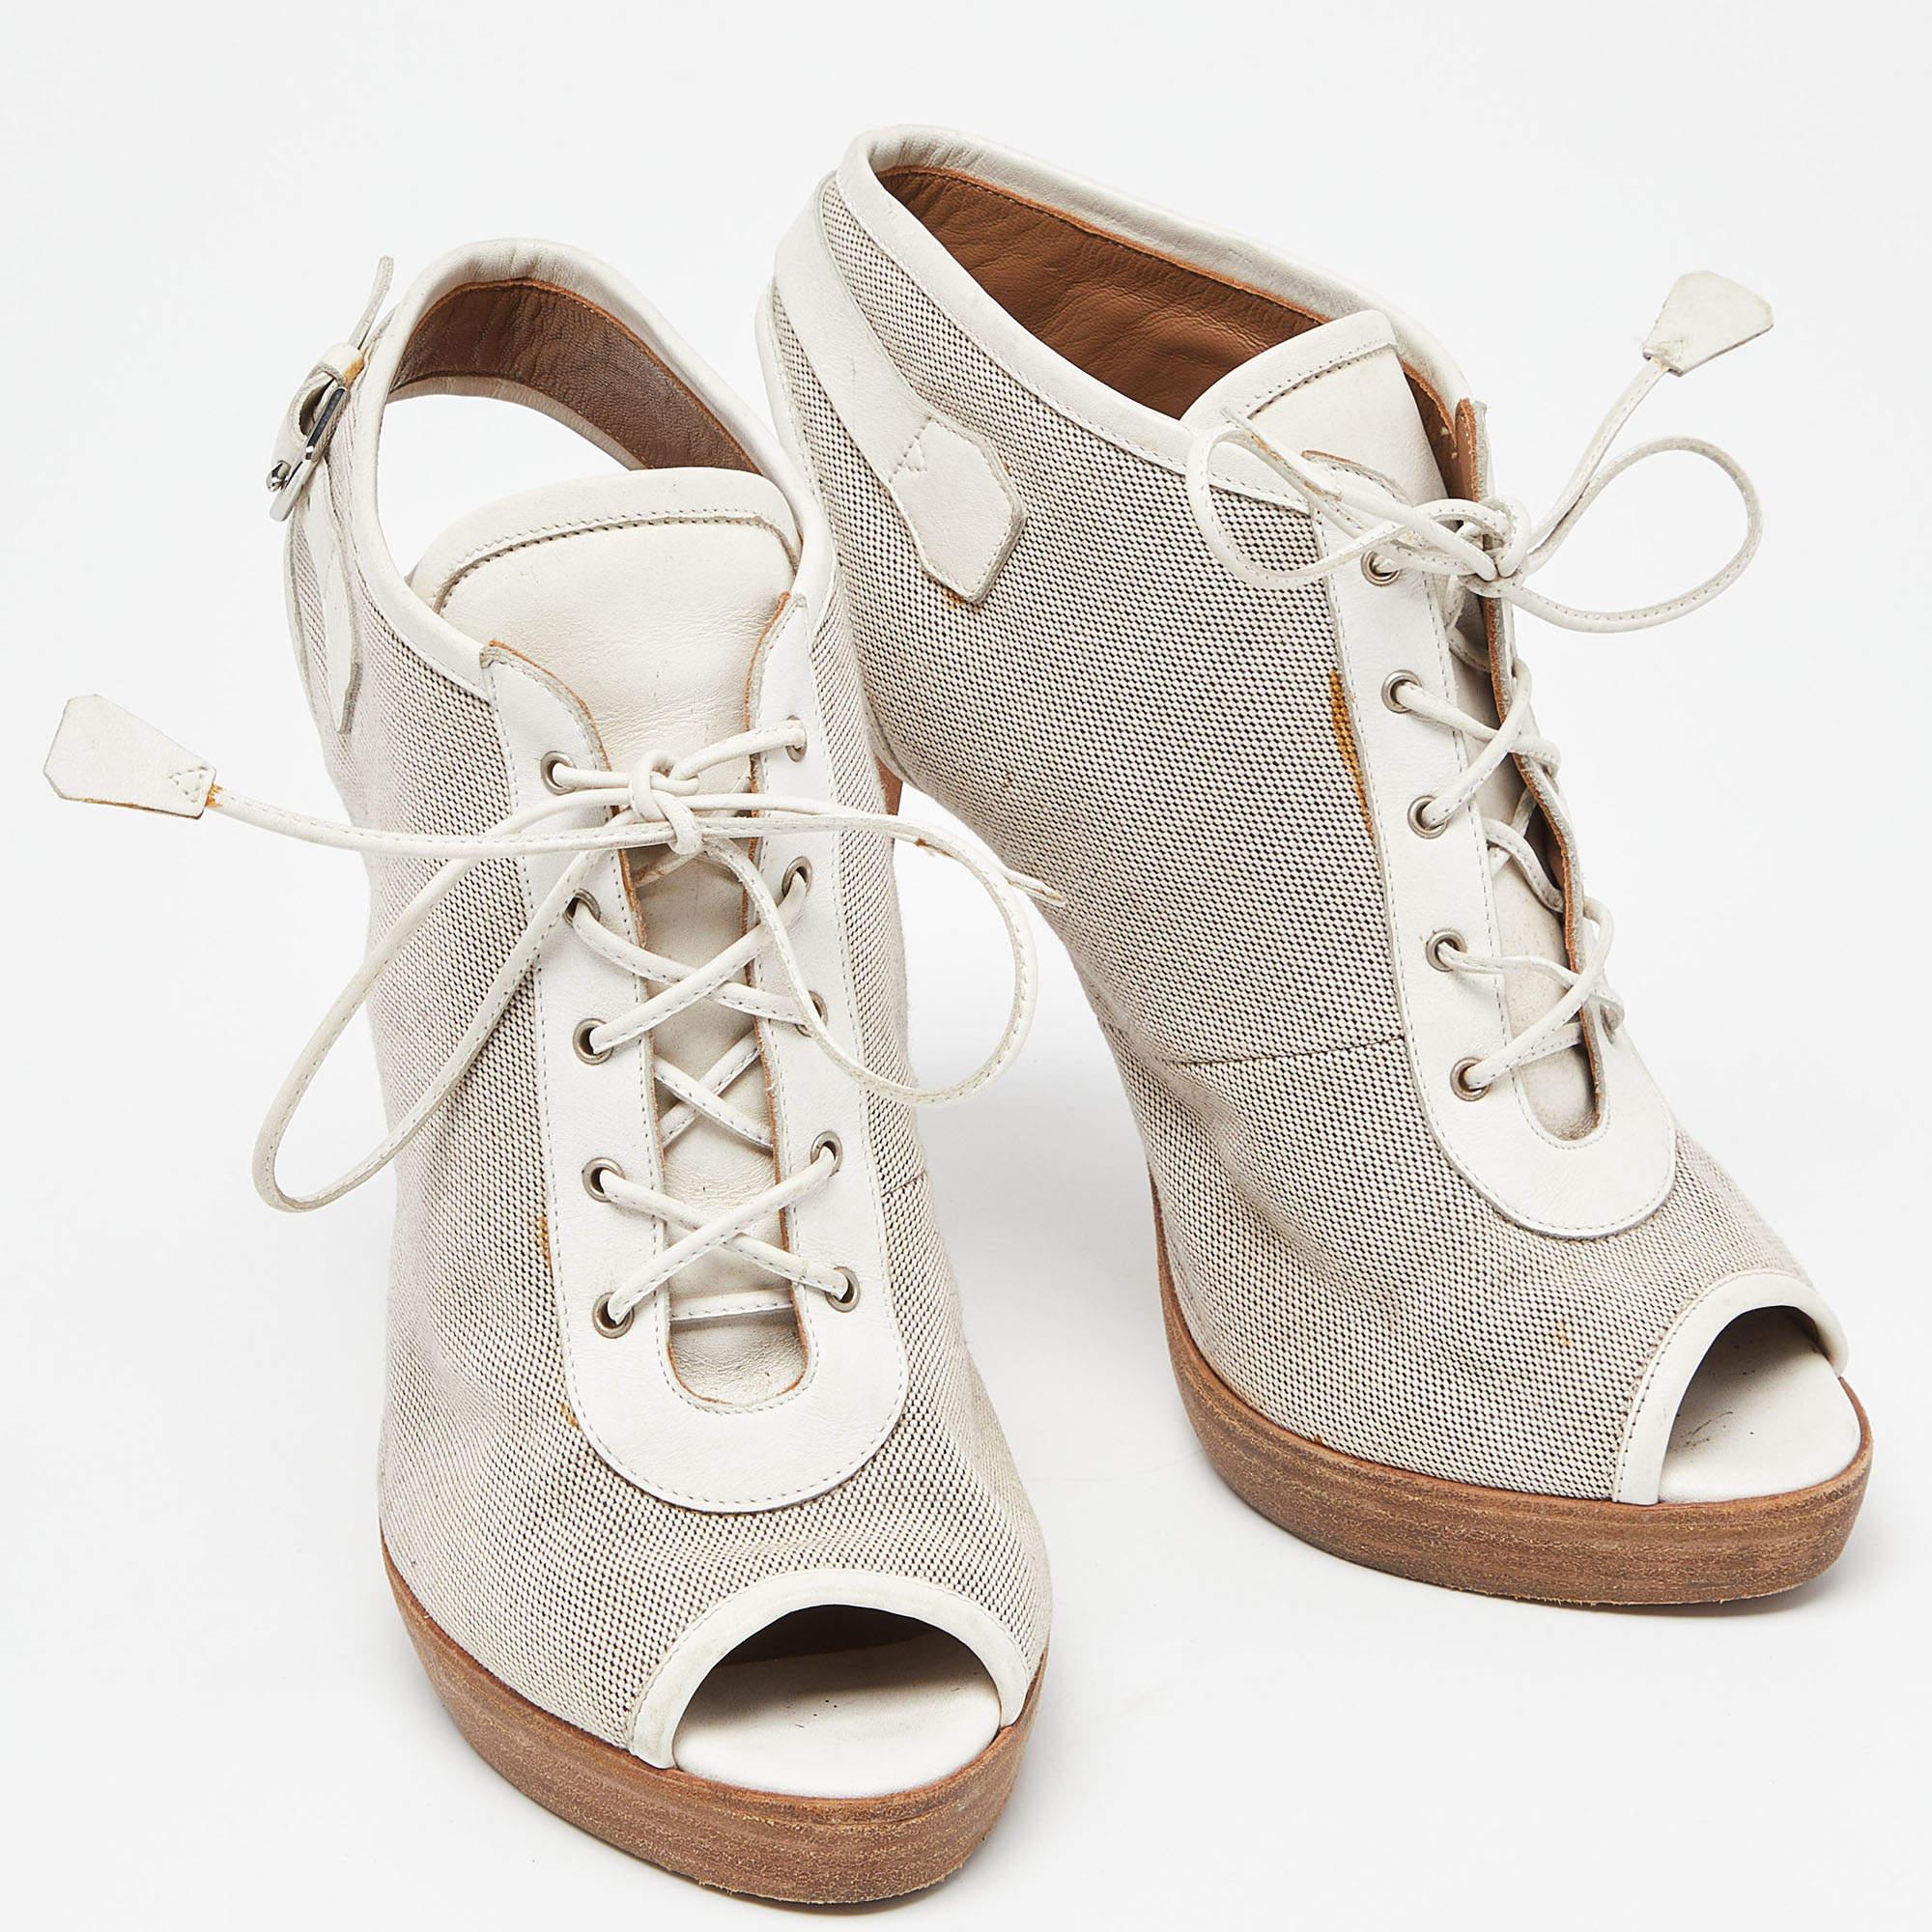 Hermes Grey/White Canvas and Leather Peep Toe Lace Up Slingback Booties Size 39 In Good Condition For Sale In Dubai, Al Qouz 2